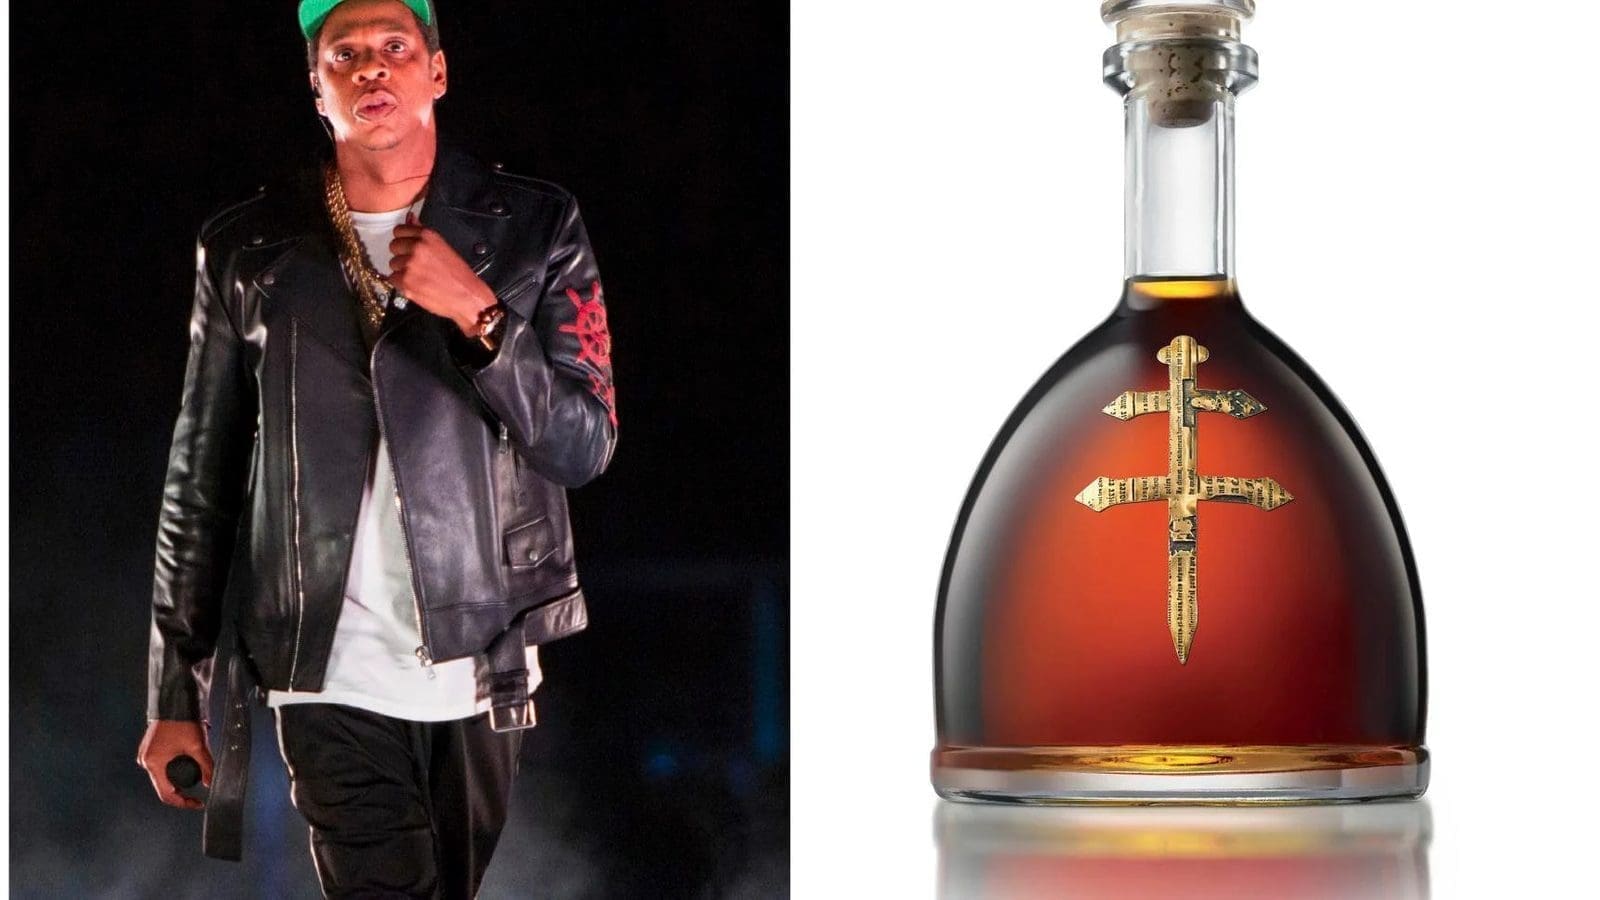 Bacardi settles legal battles with Jay-Z through additional stake buyout in super-premium cognac brand D’Ussé